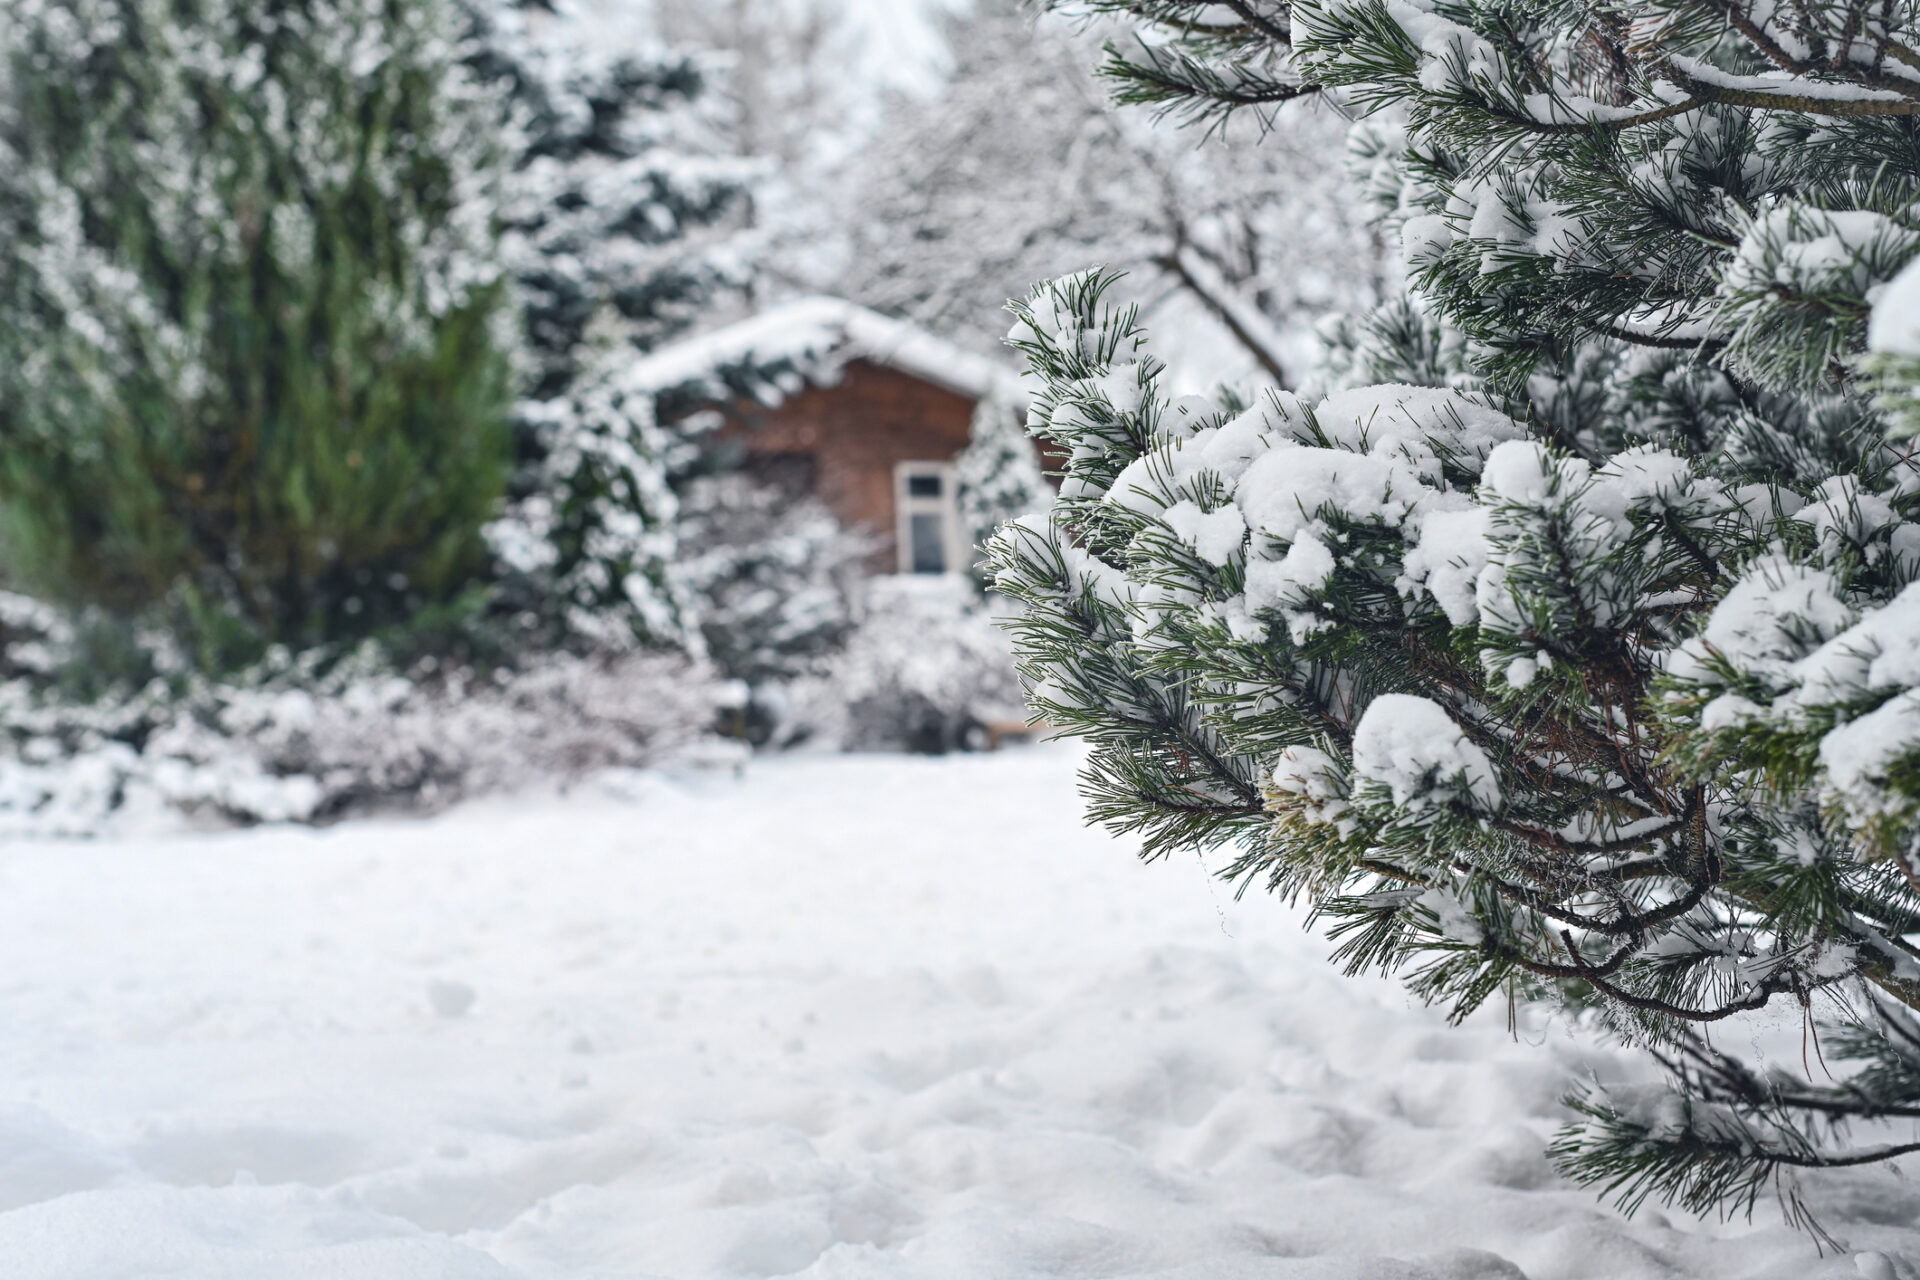 The image shows a snow-covered pine branch in focus with a blurred wooden cabin in the background amidst a snowy landscape with various trees.